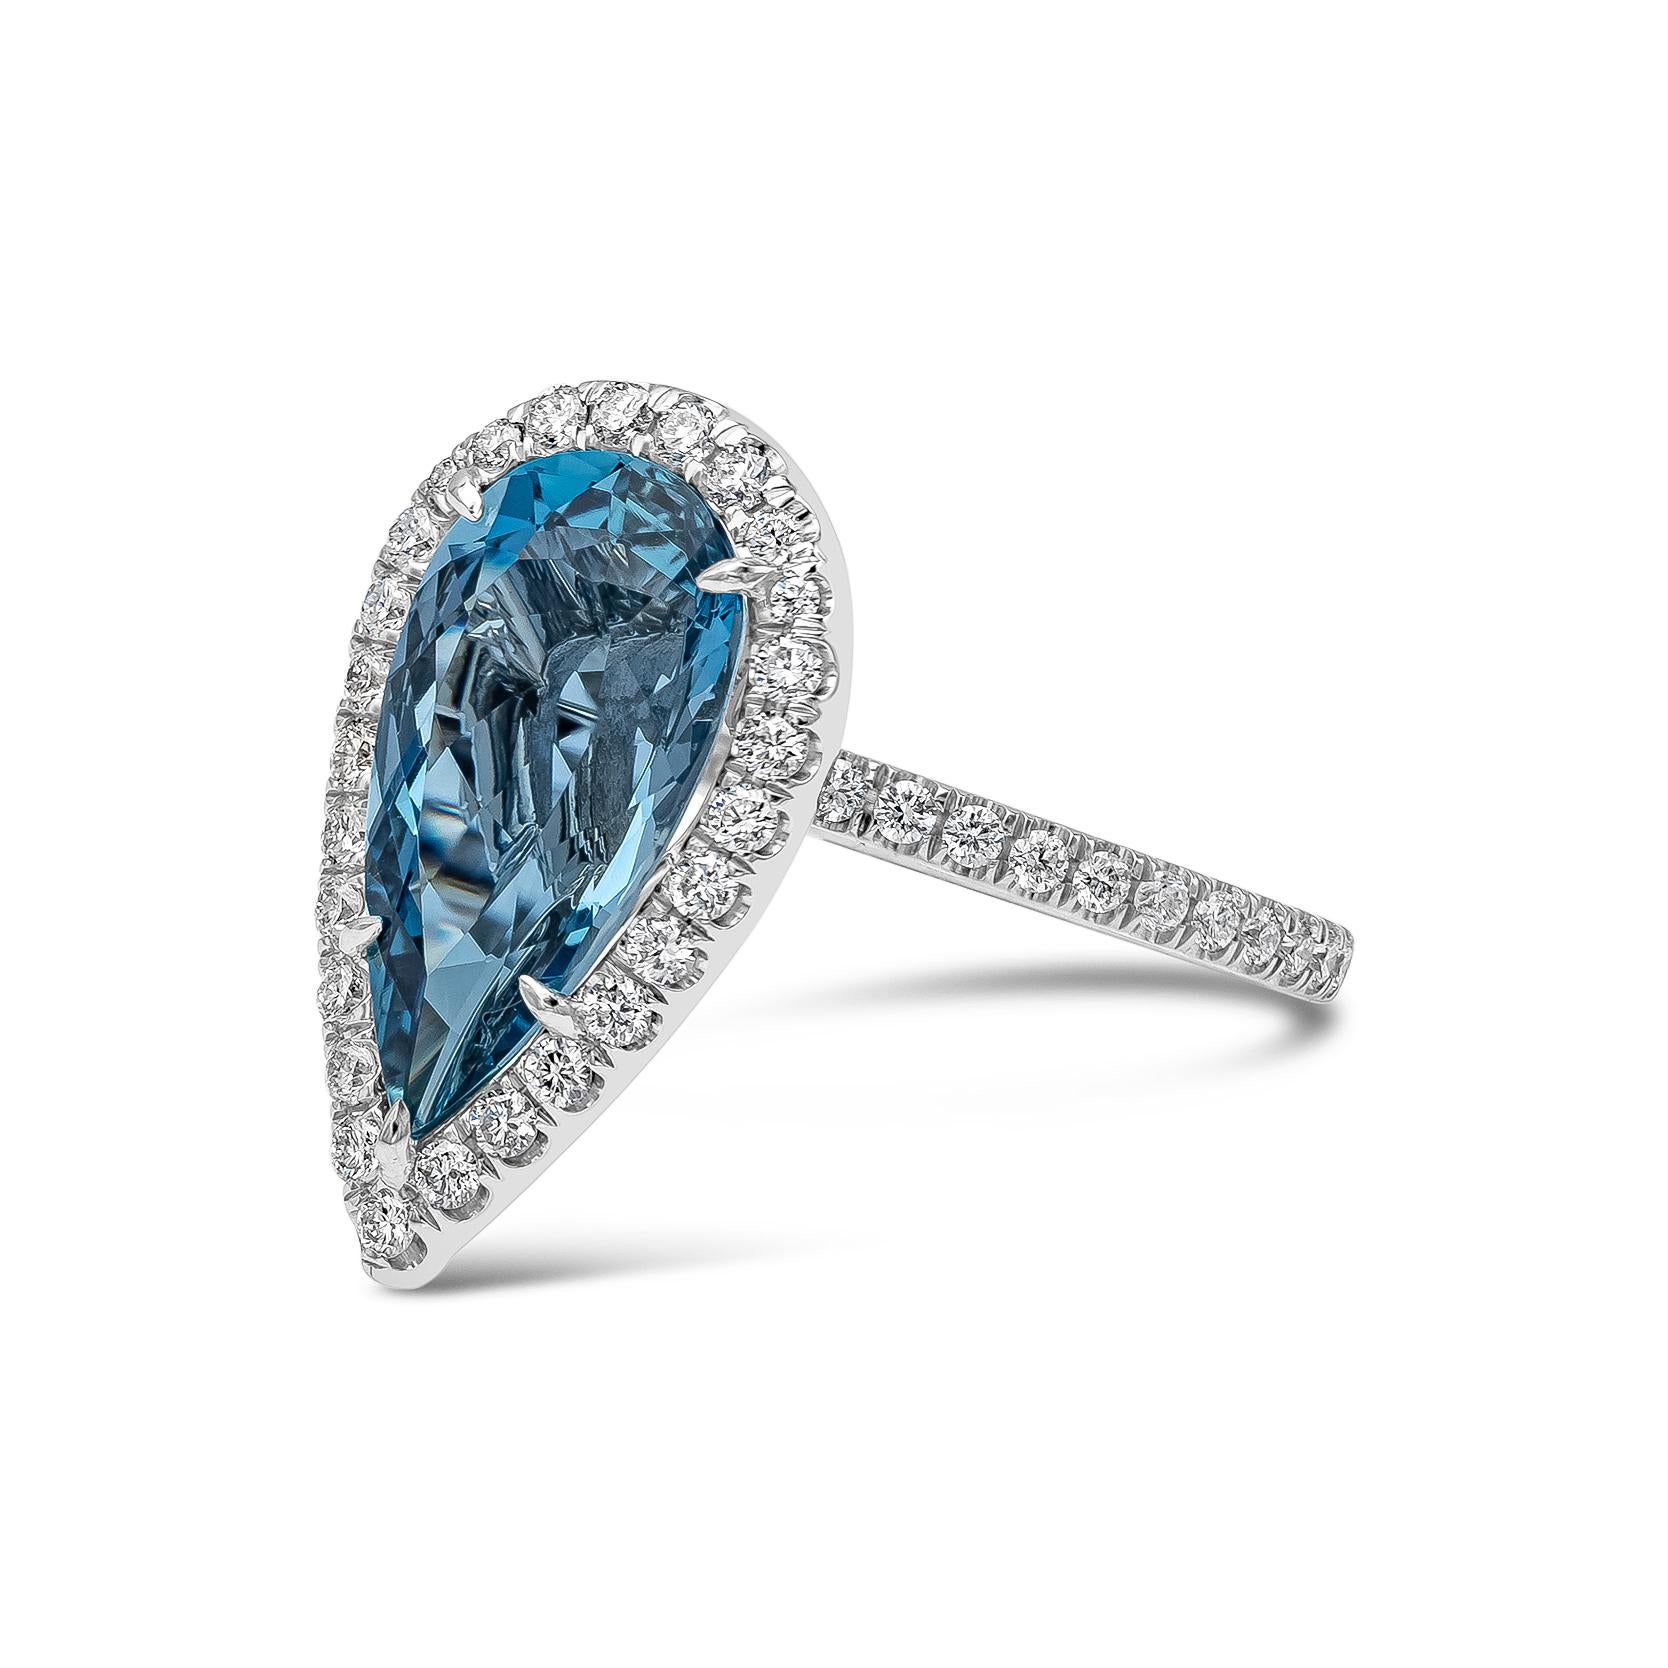 A beautiful engagement ring showcasing a 3.63 carat vivid blue pear shape aquamarine (Santa Maria), set in a brilliant diamond halo made in platinum. Diamonds weigh 0.76 carats total. Aquamarine is accompanied with a GIA report. 

(size 6, sizable